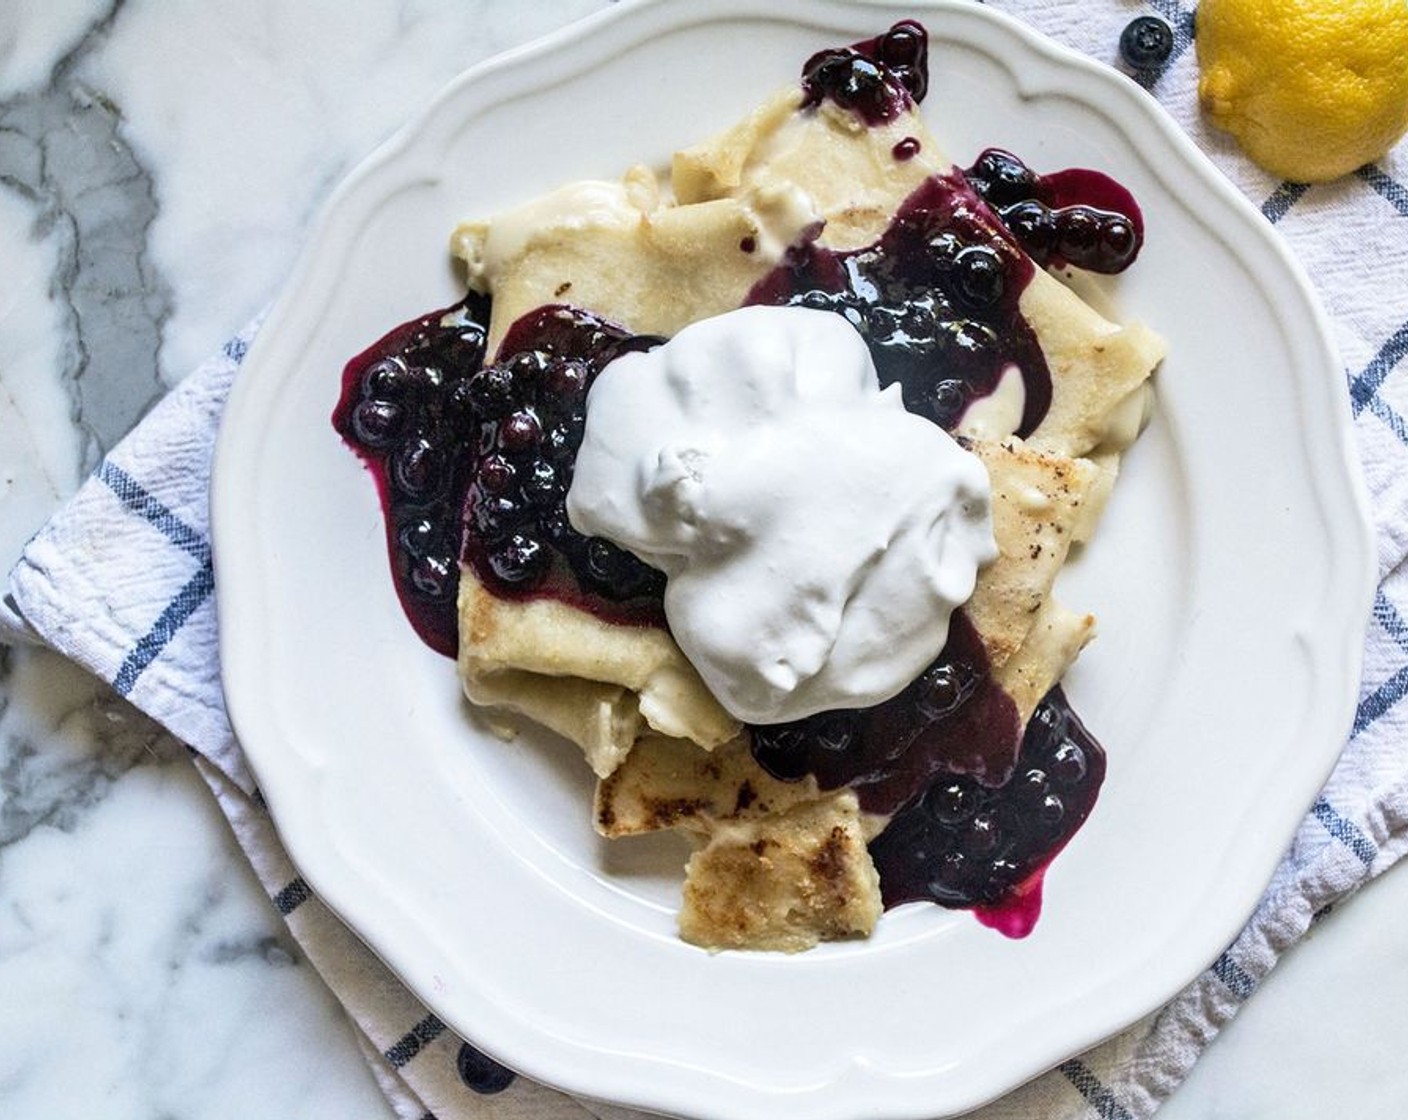 step 8 Once Blueberry Blintzes are lightly golden and slightly crispy, add to a plate. Top with blueberry compote and a dollop or two of coconut whipped cream, then serve!